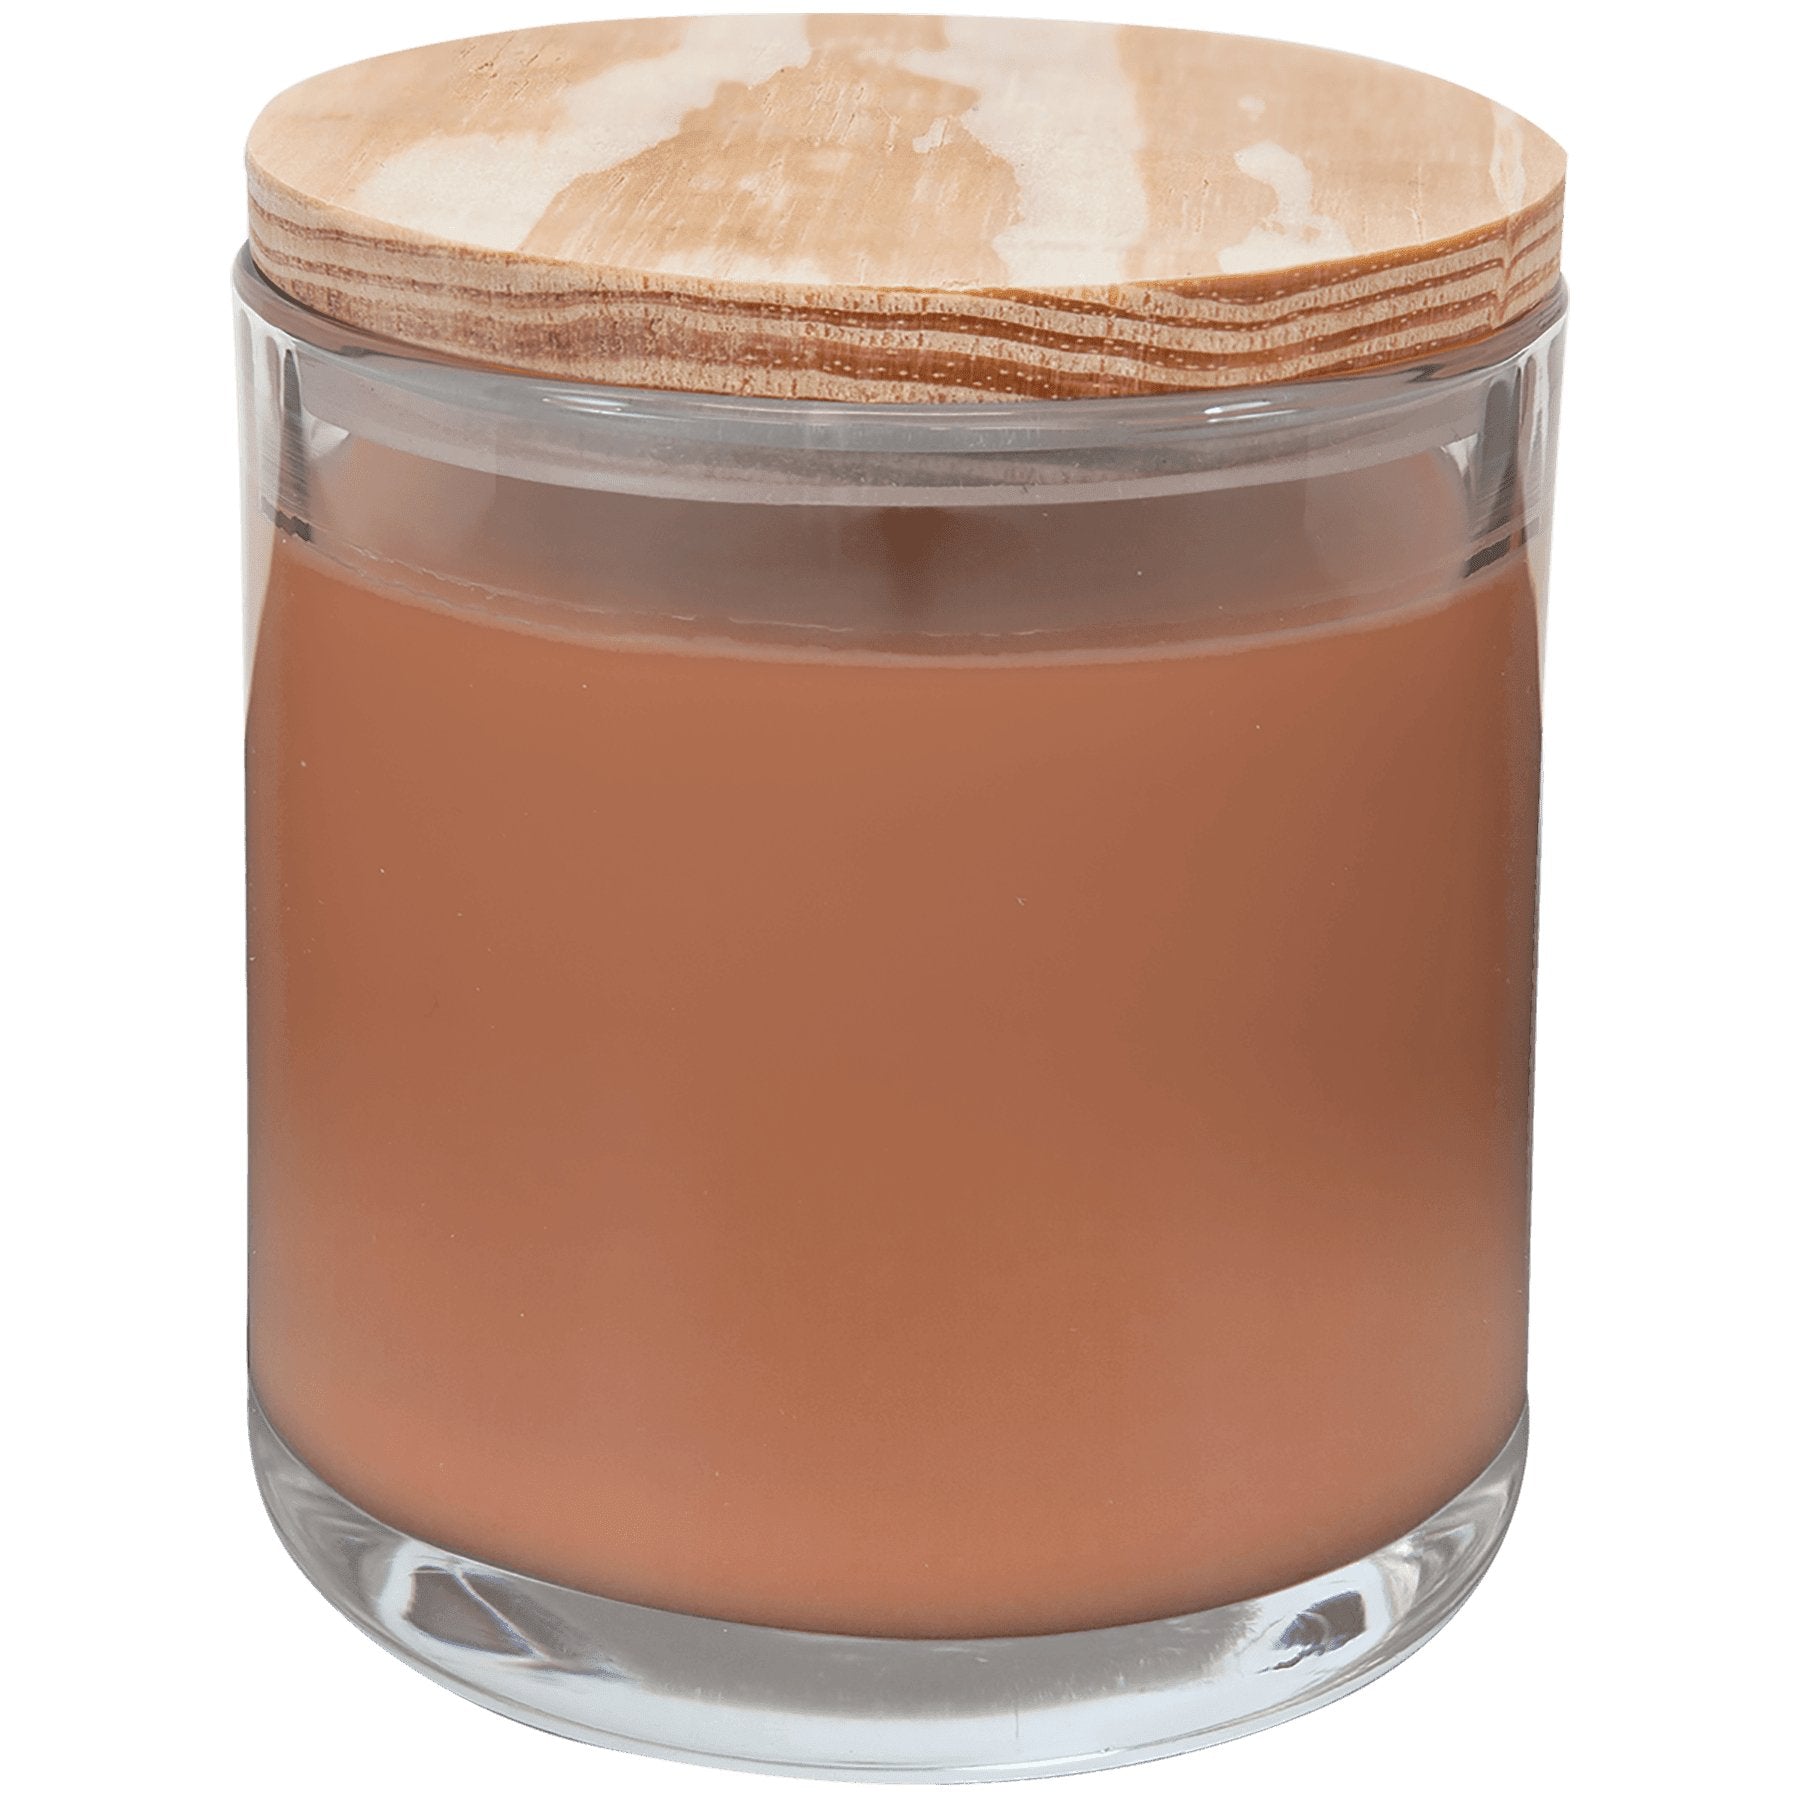 Customizable Scented Candle in a Glass Holder with Wood Lid - Legacy Creator IncTropical Coconut